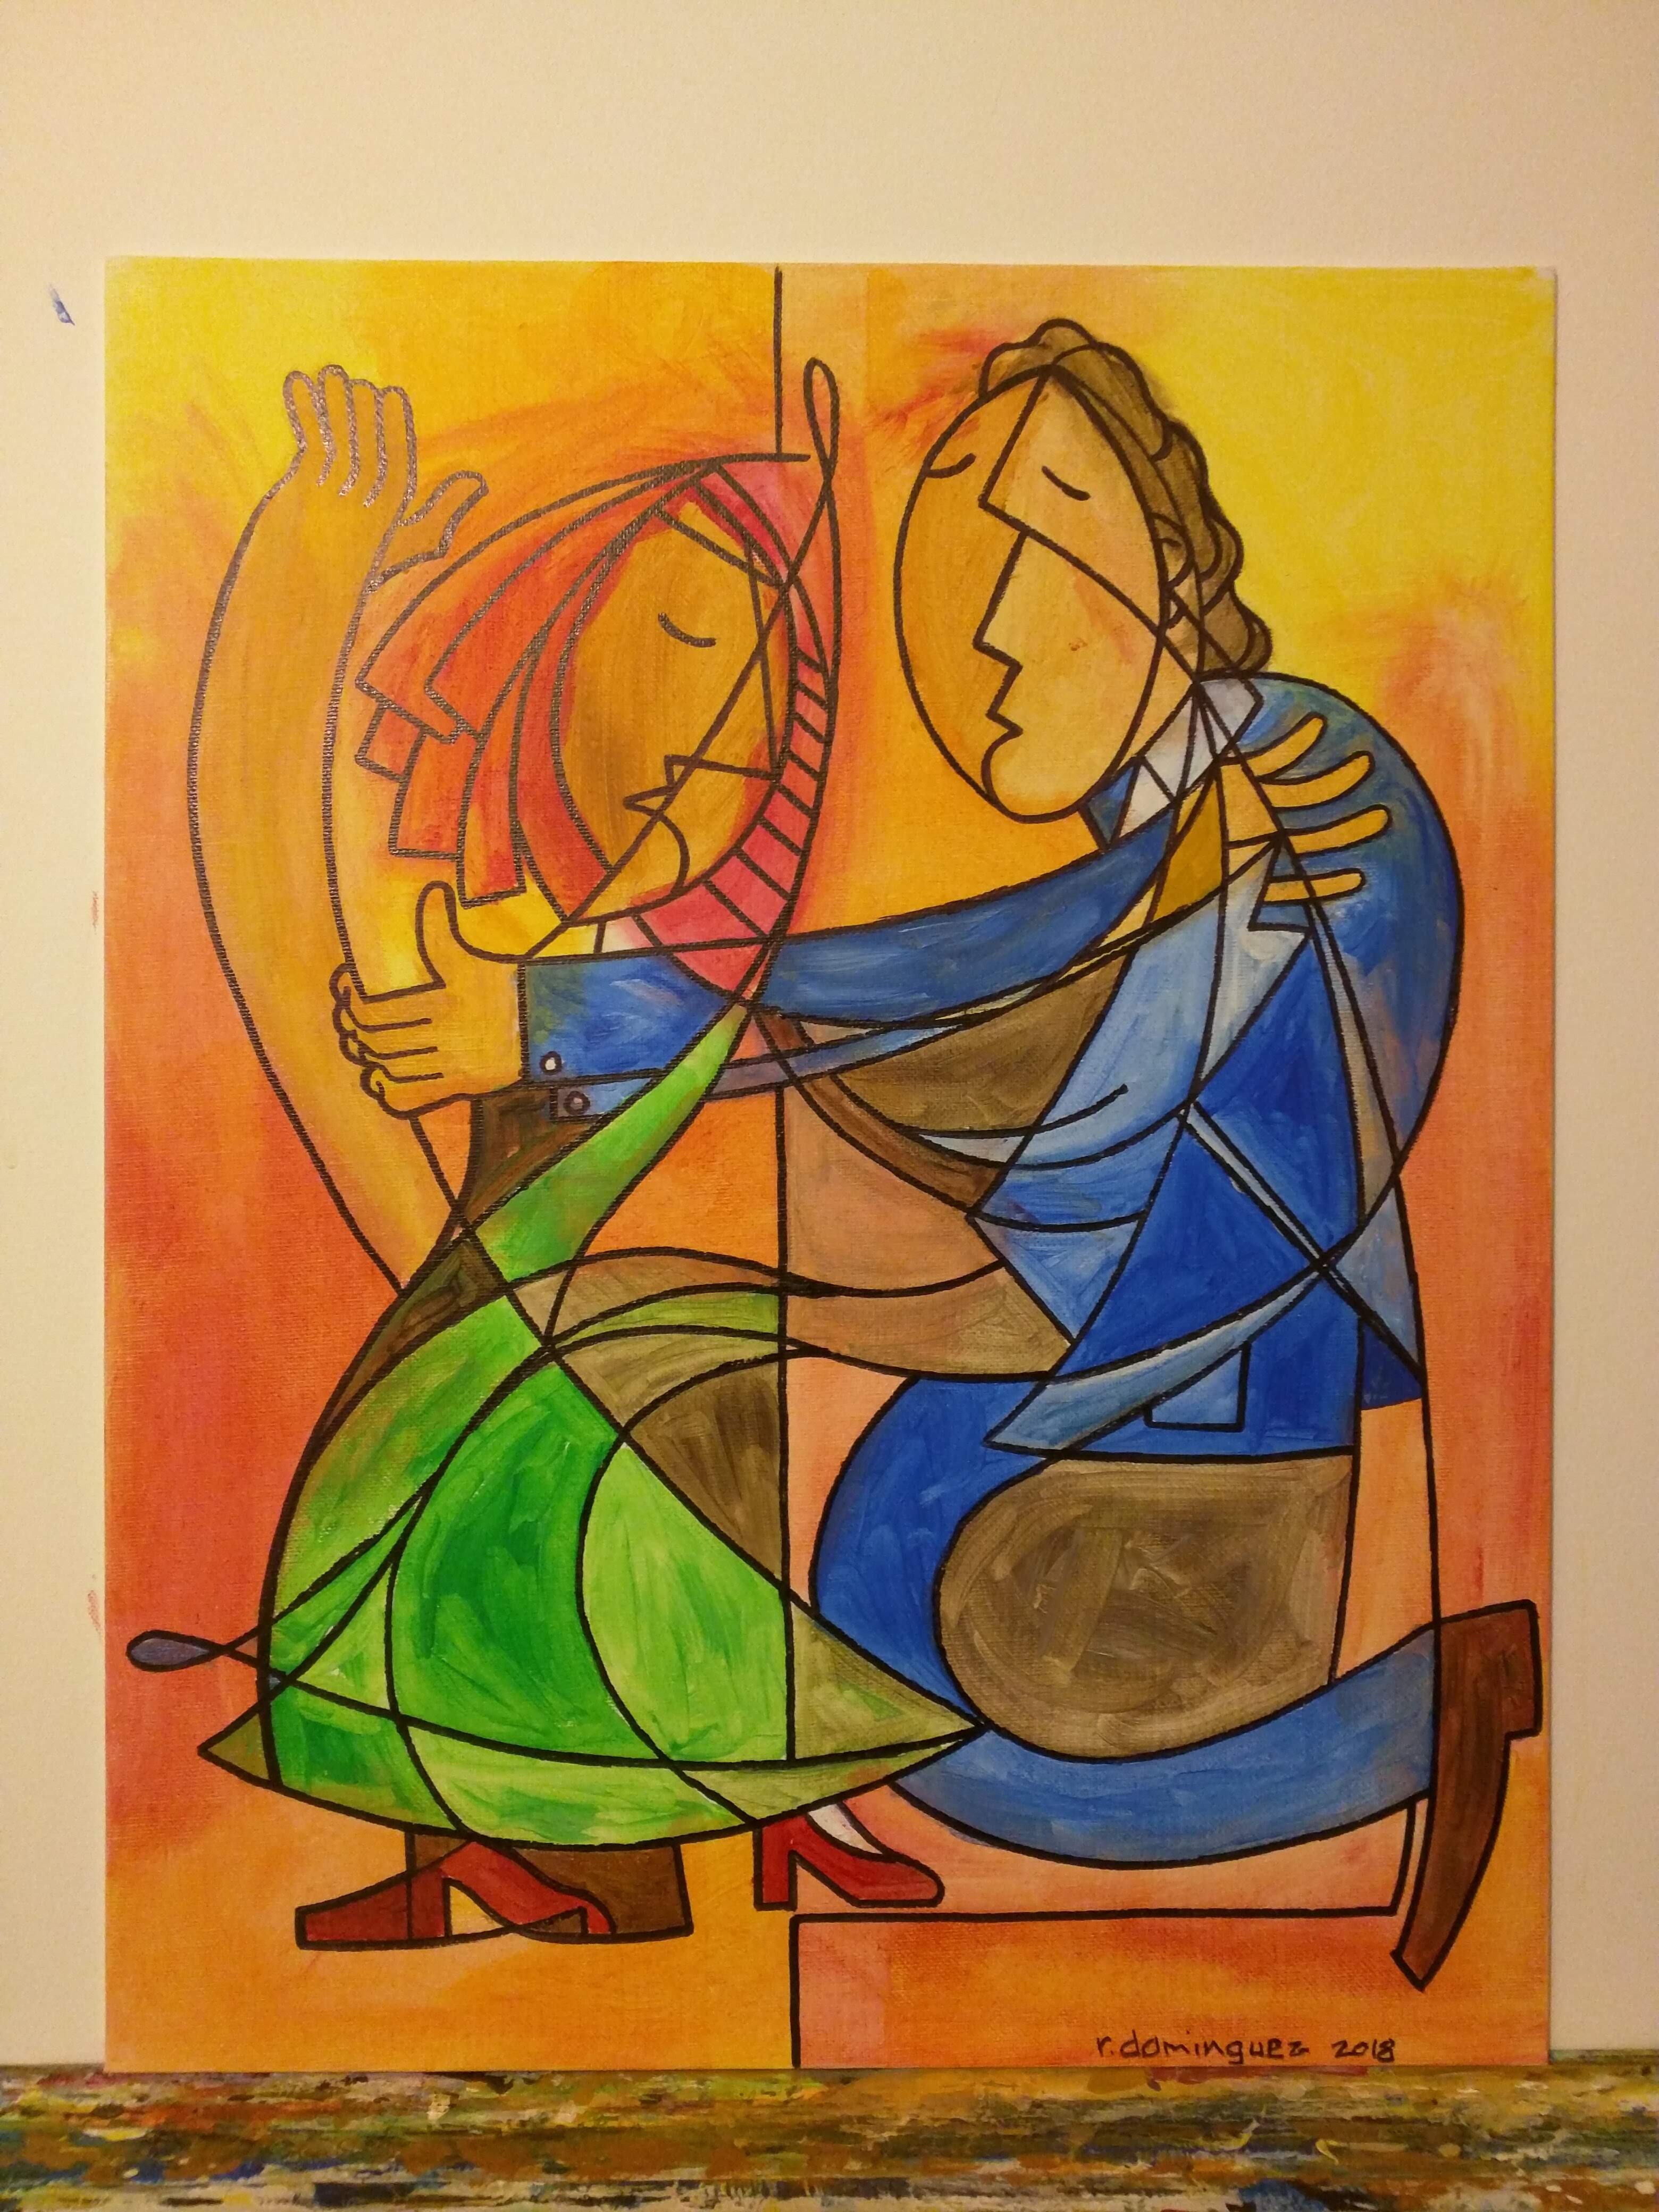 A painting of two people dancing.